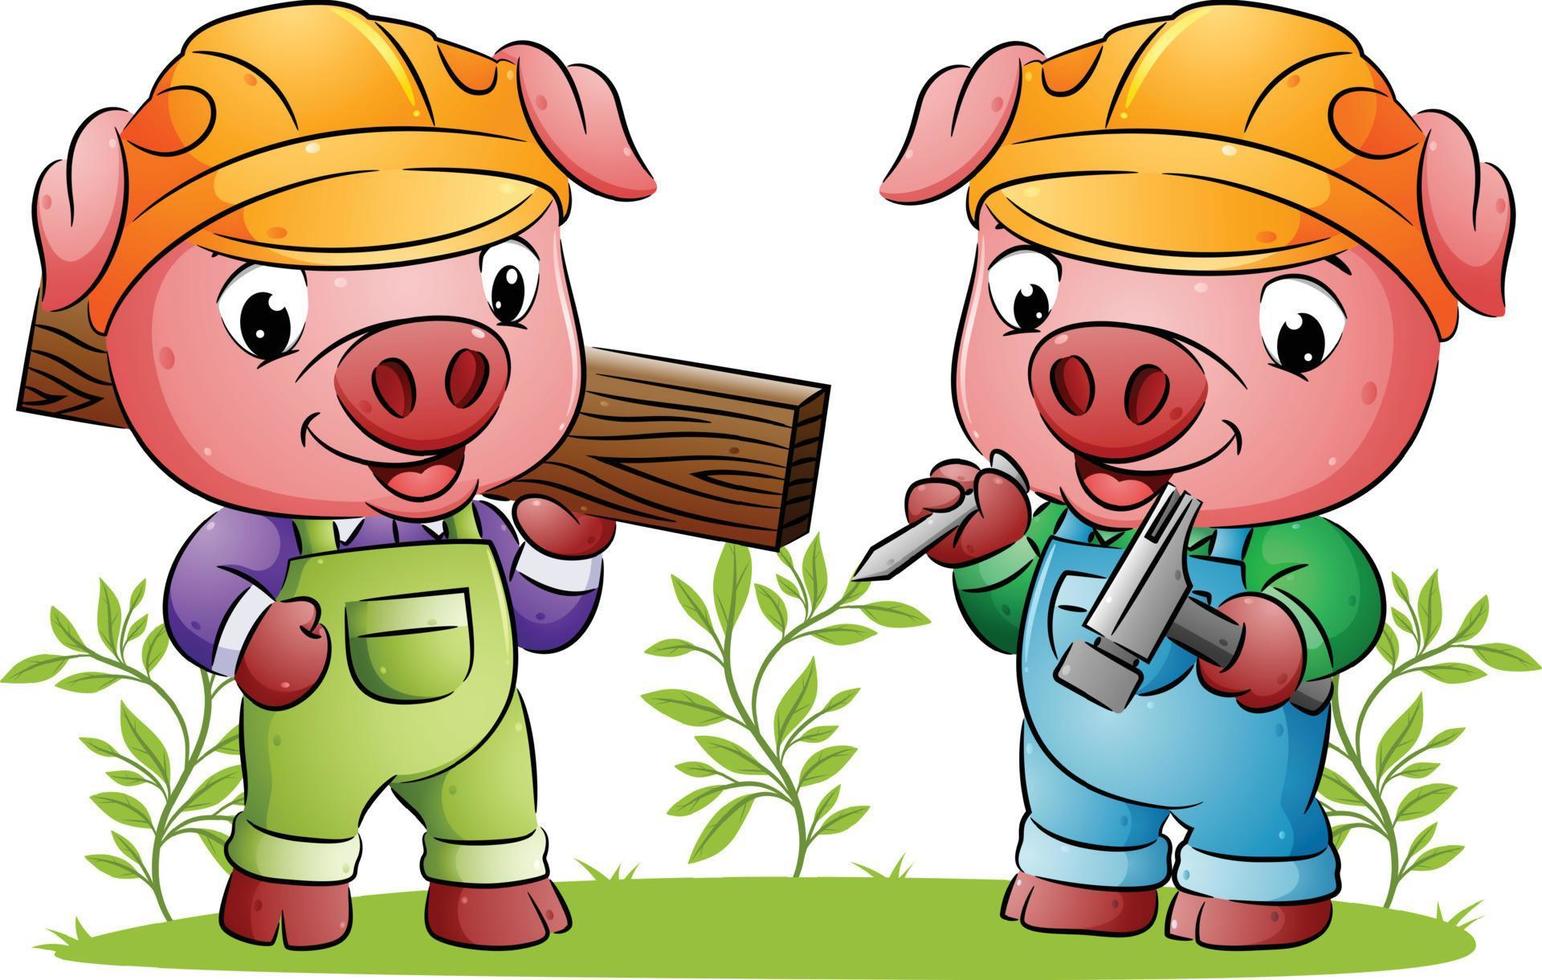 The builder pigs are holding the wooden board and the hammer vector